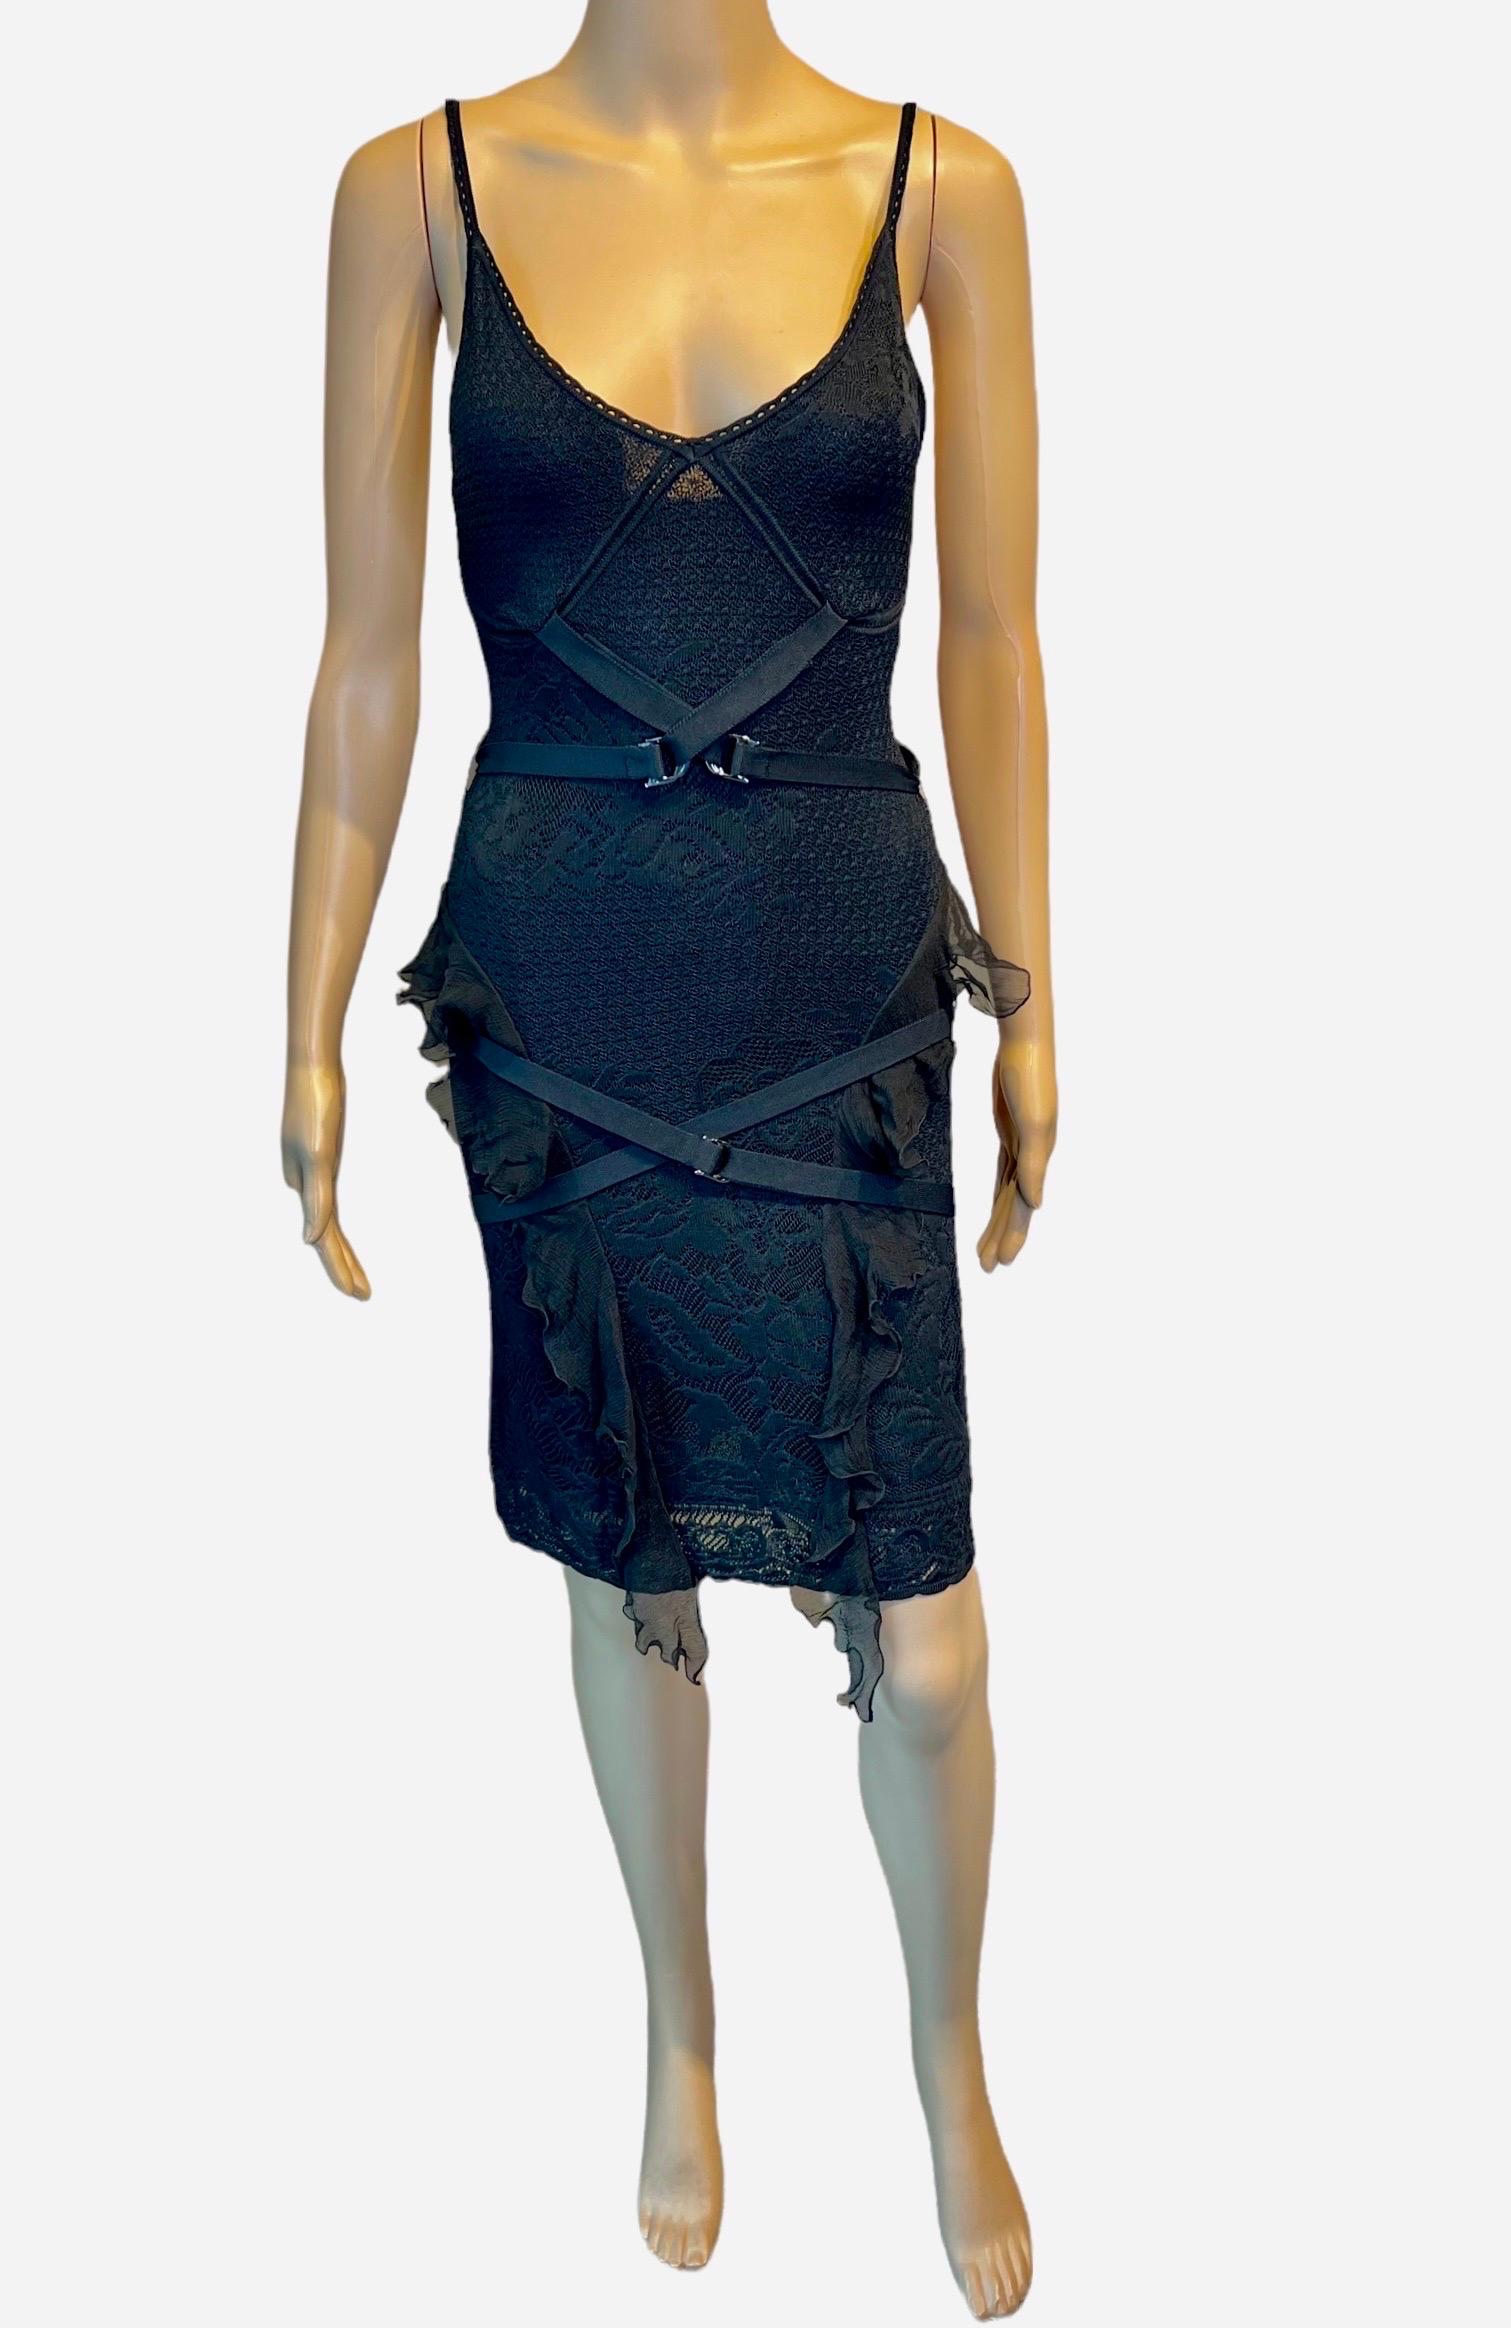 Christian Dior by John Galliano S/S 2003 Sheer Lace Bondage Knit Black Dress  For Sale 2